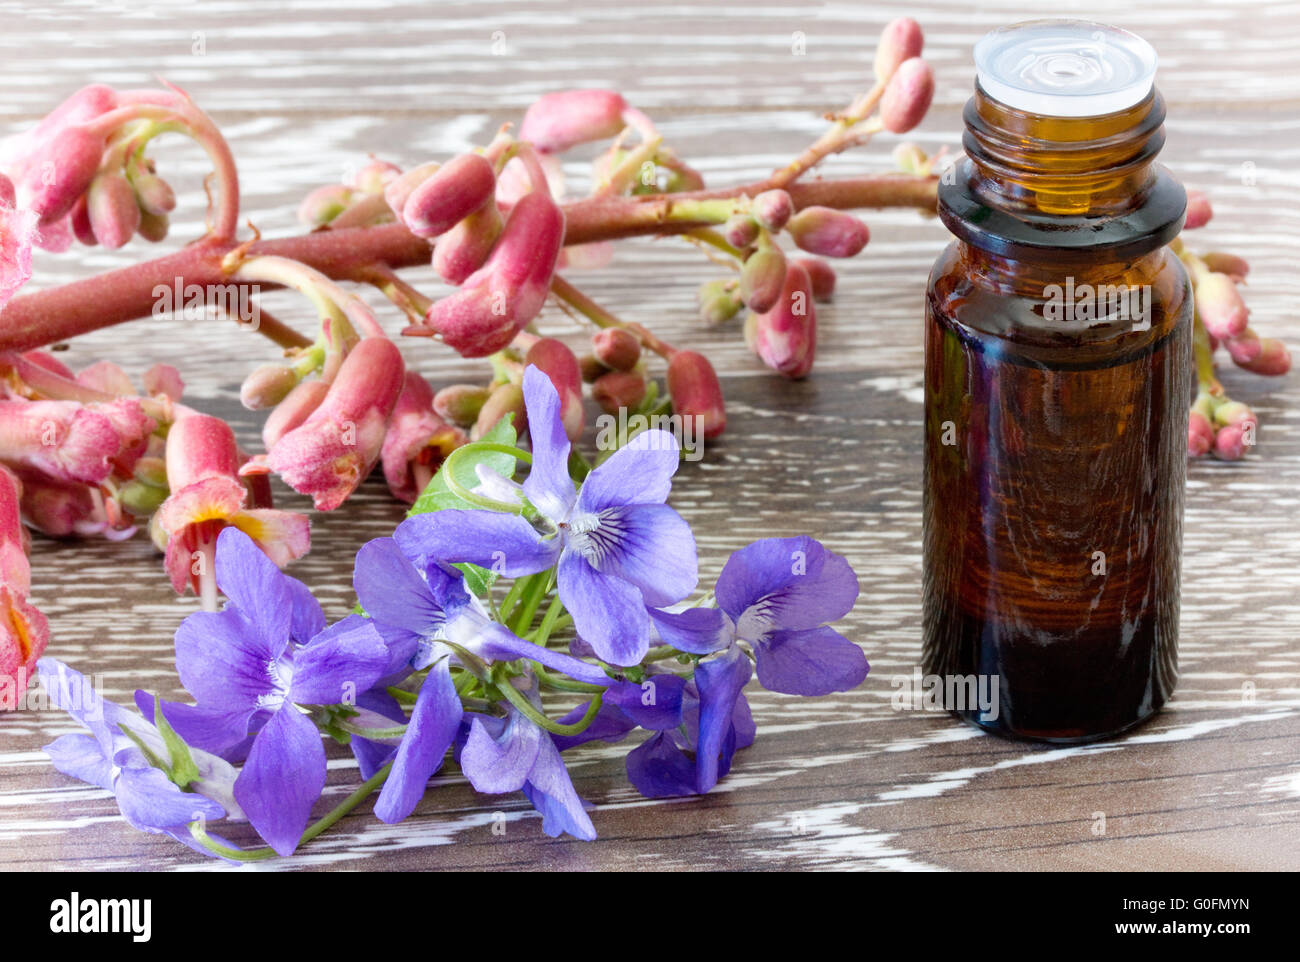 Bach flower remedies of red chestnut and violets Stock Photo